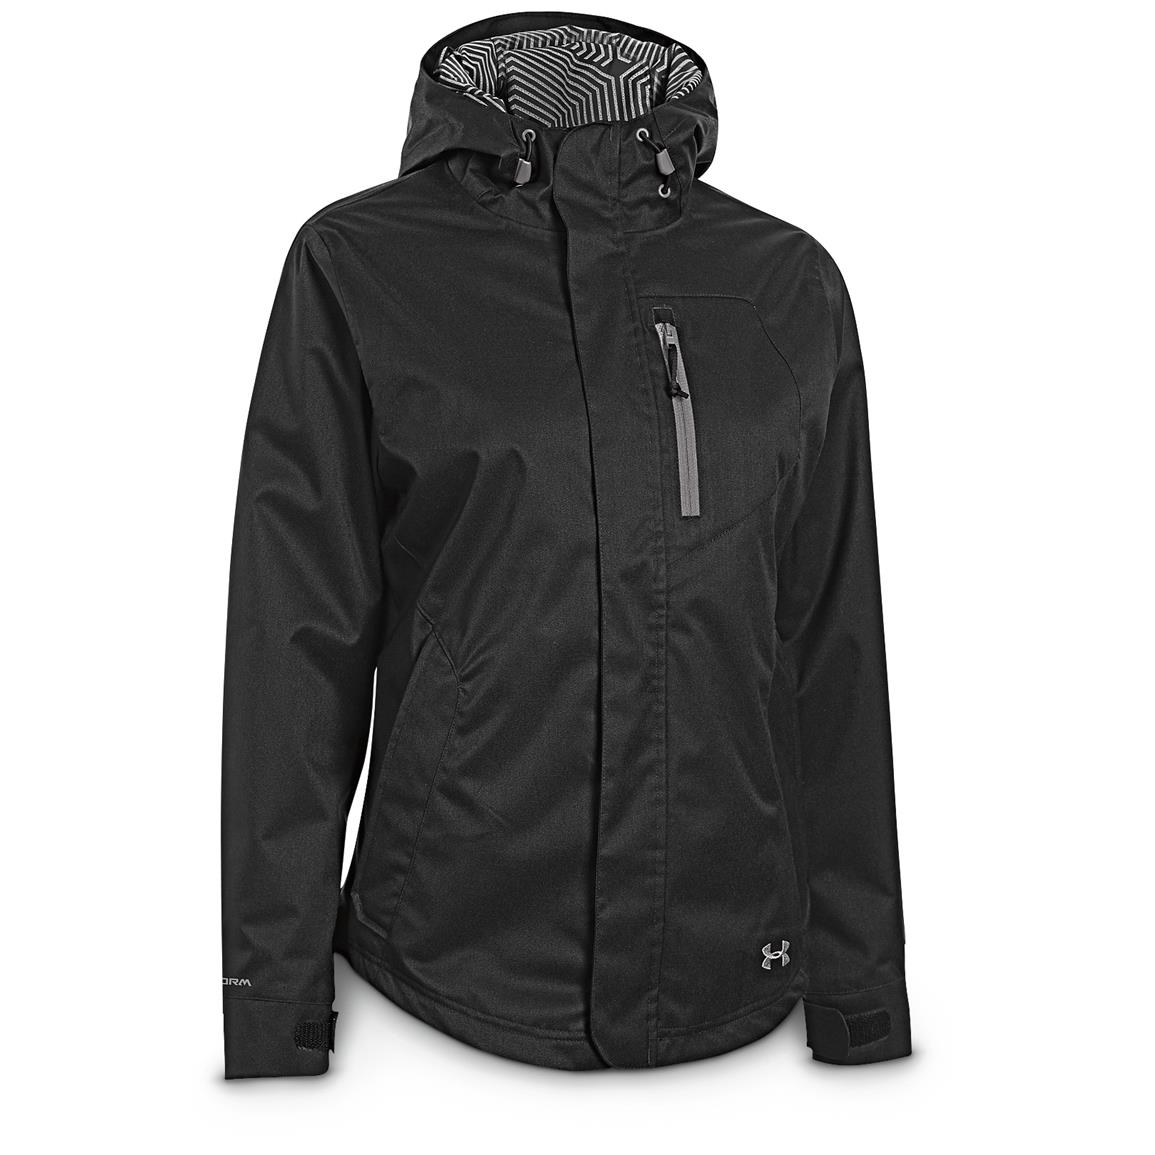 under armour infrared jacket review